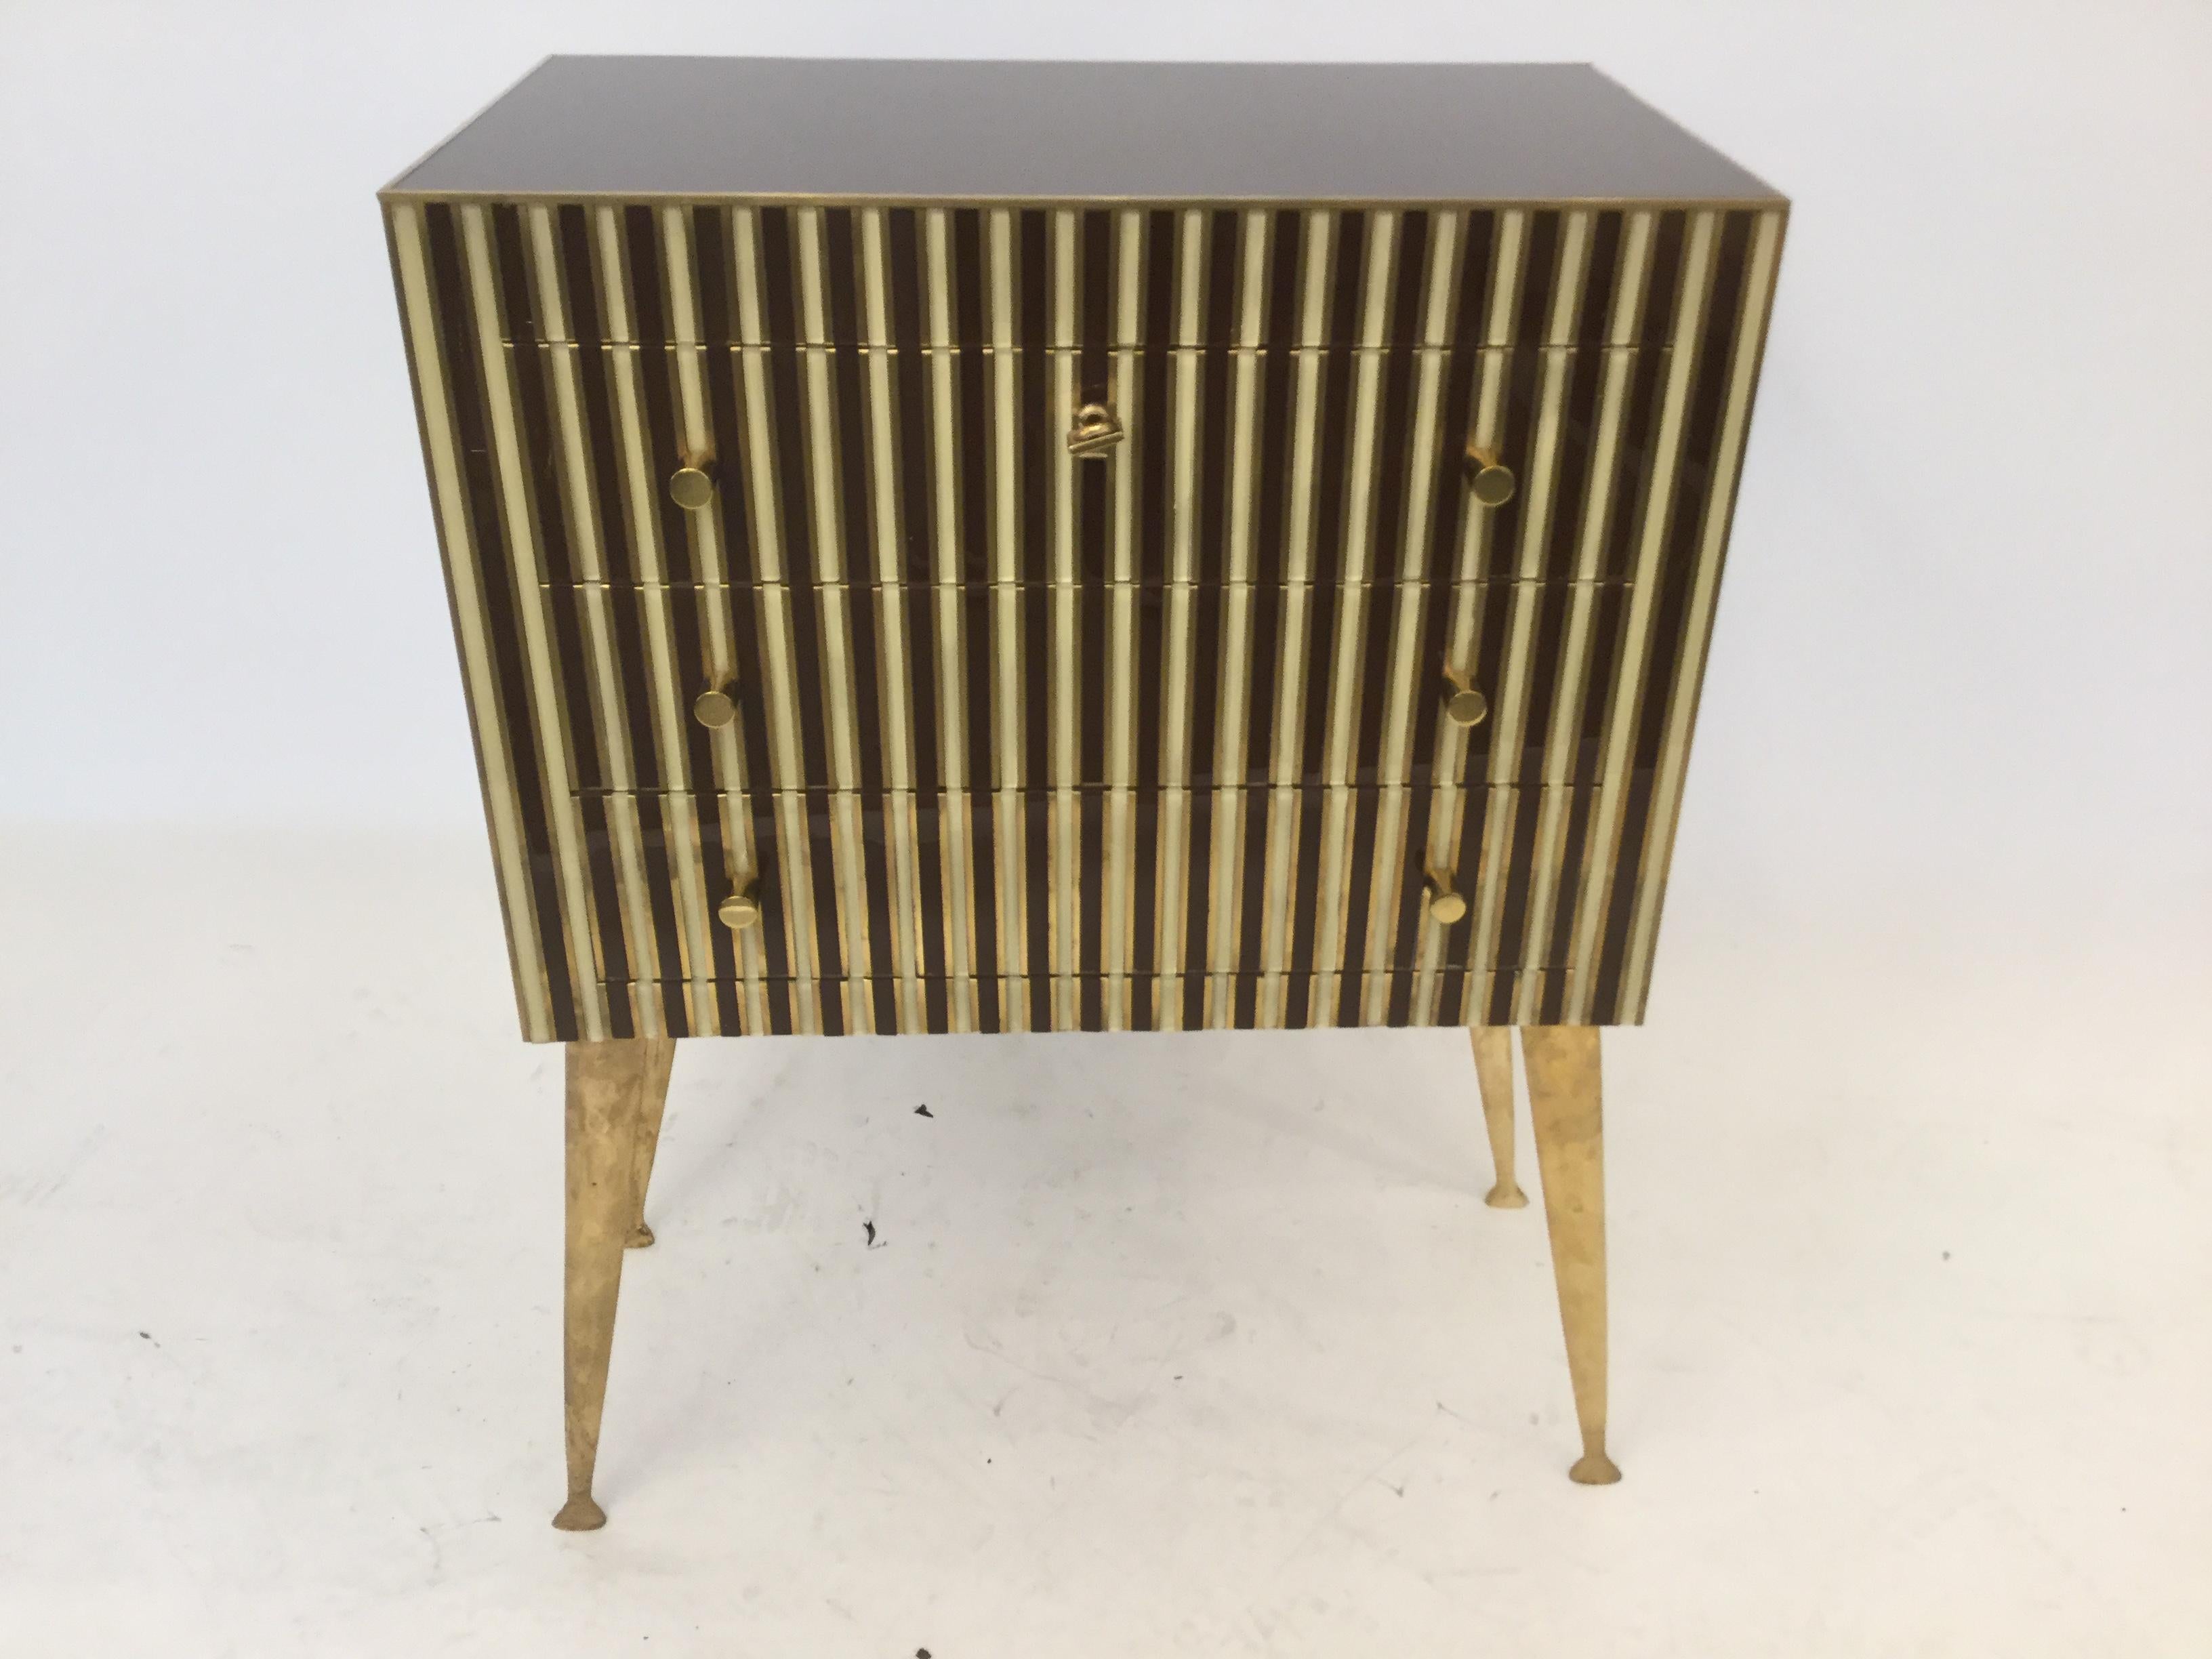 A stunning pair of side tables in glass and brass inlaid with bronze legs.